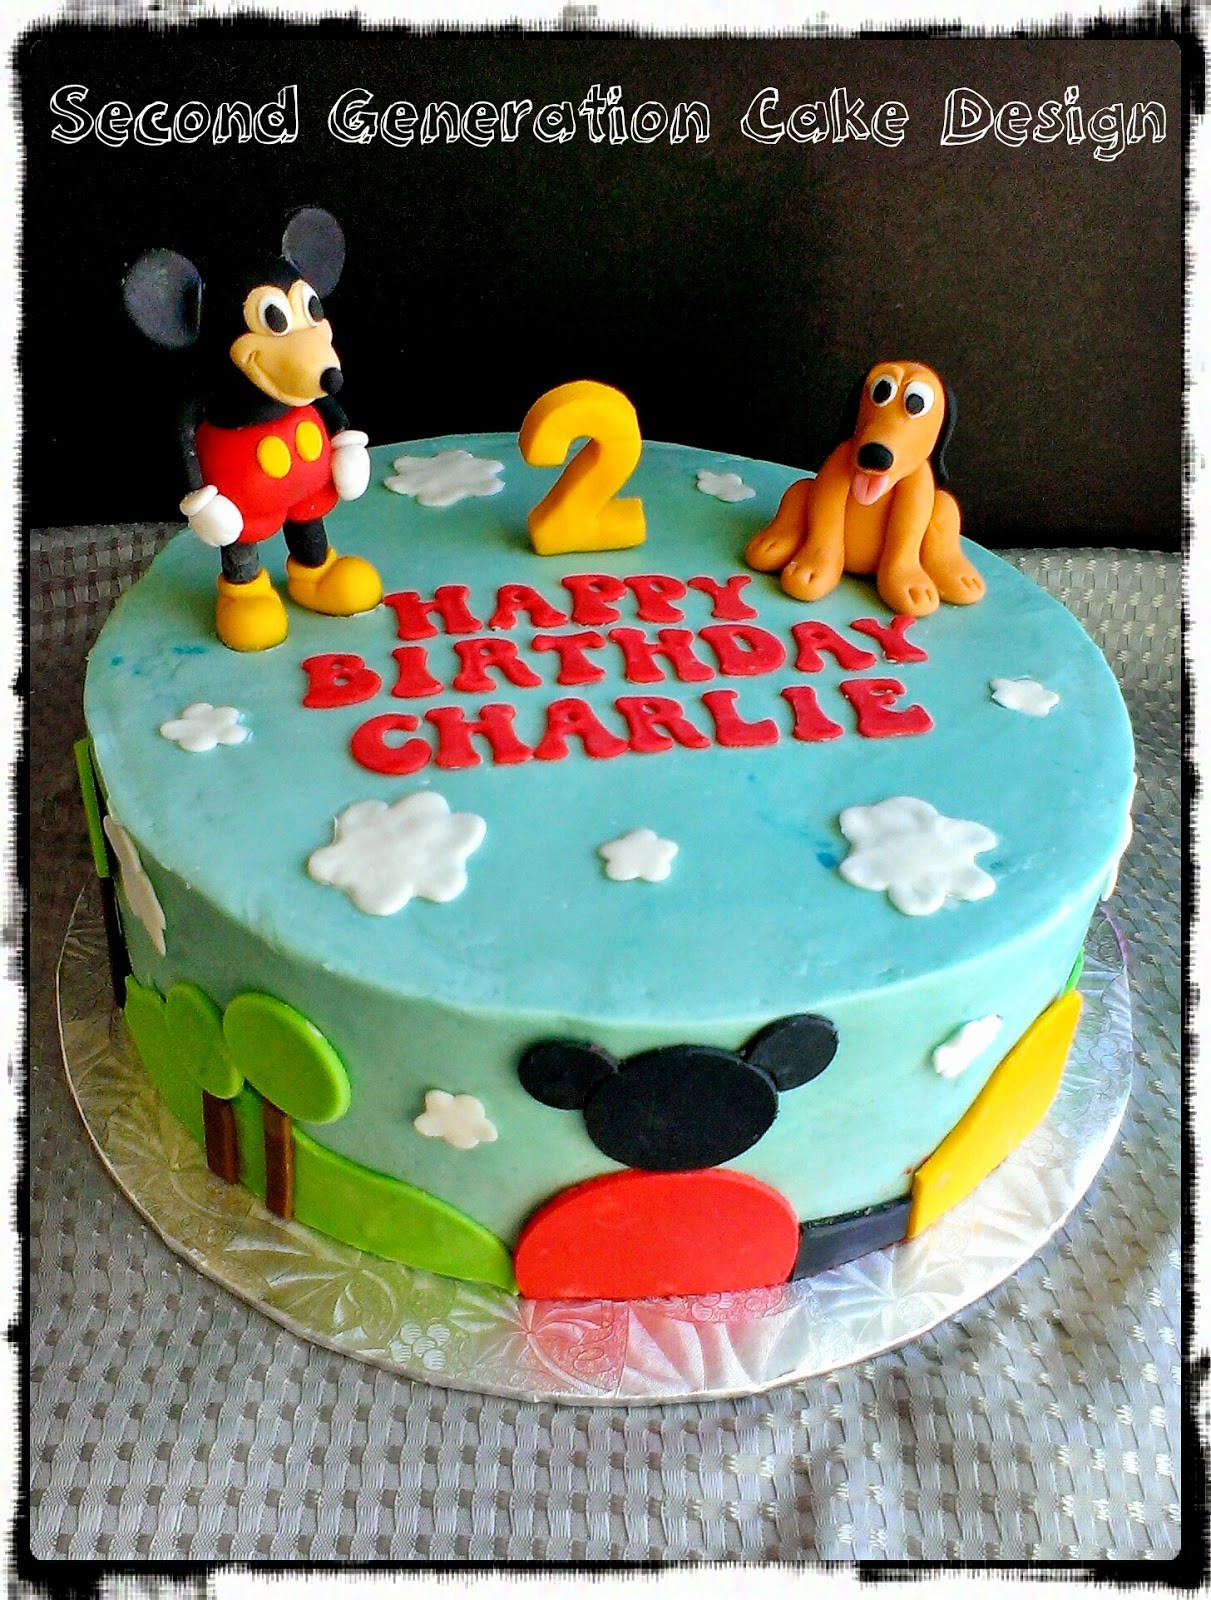 Mickey Mouse Clubhouse Birthday Cakes
 Second Generation Cake Design Mickey Mouse Clubhouse